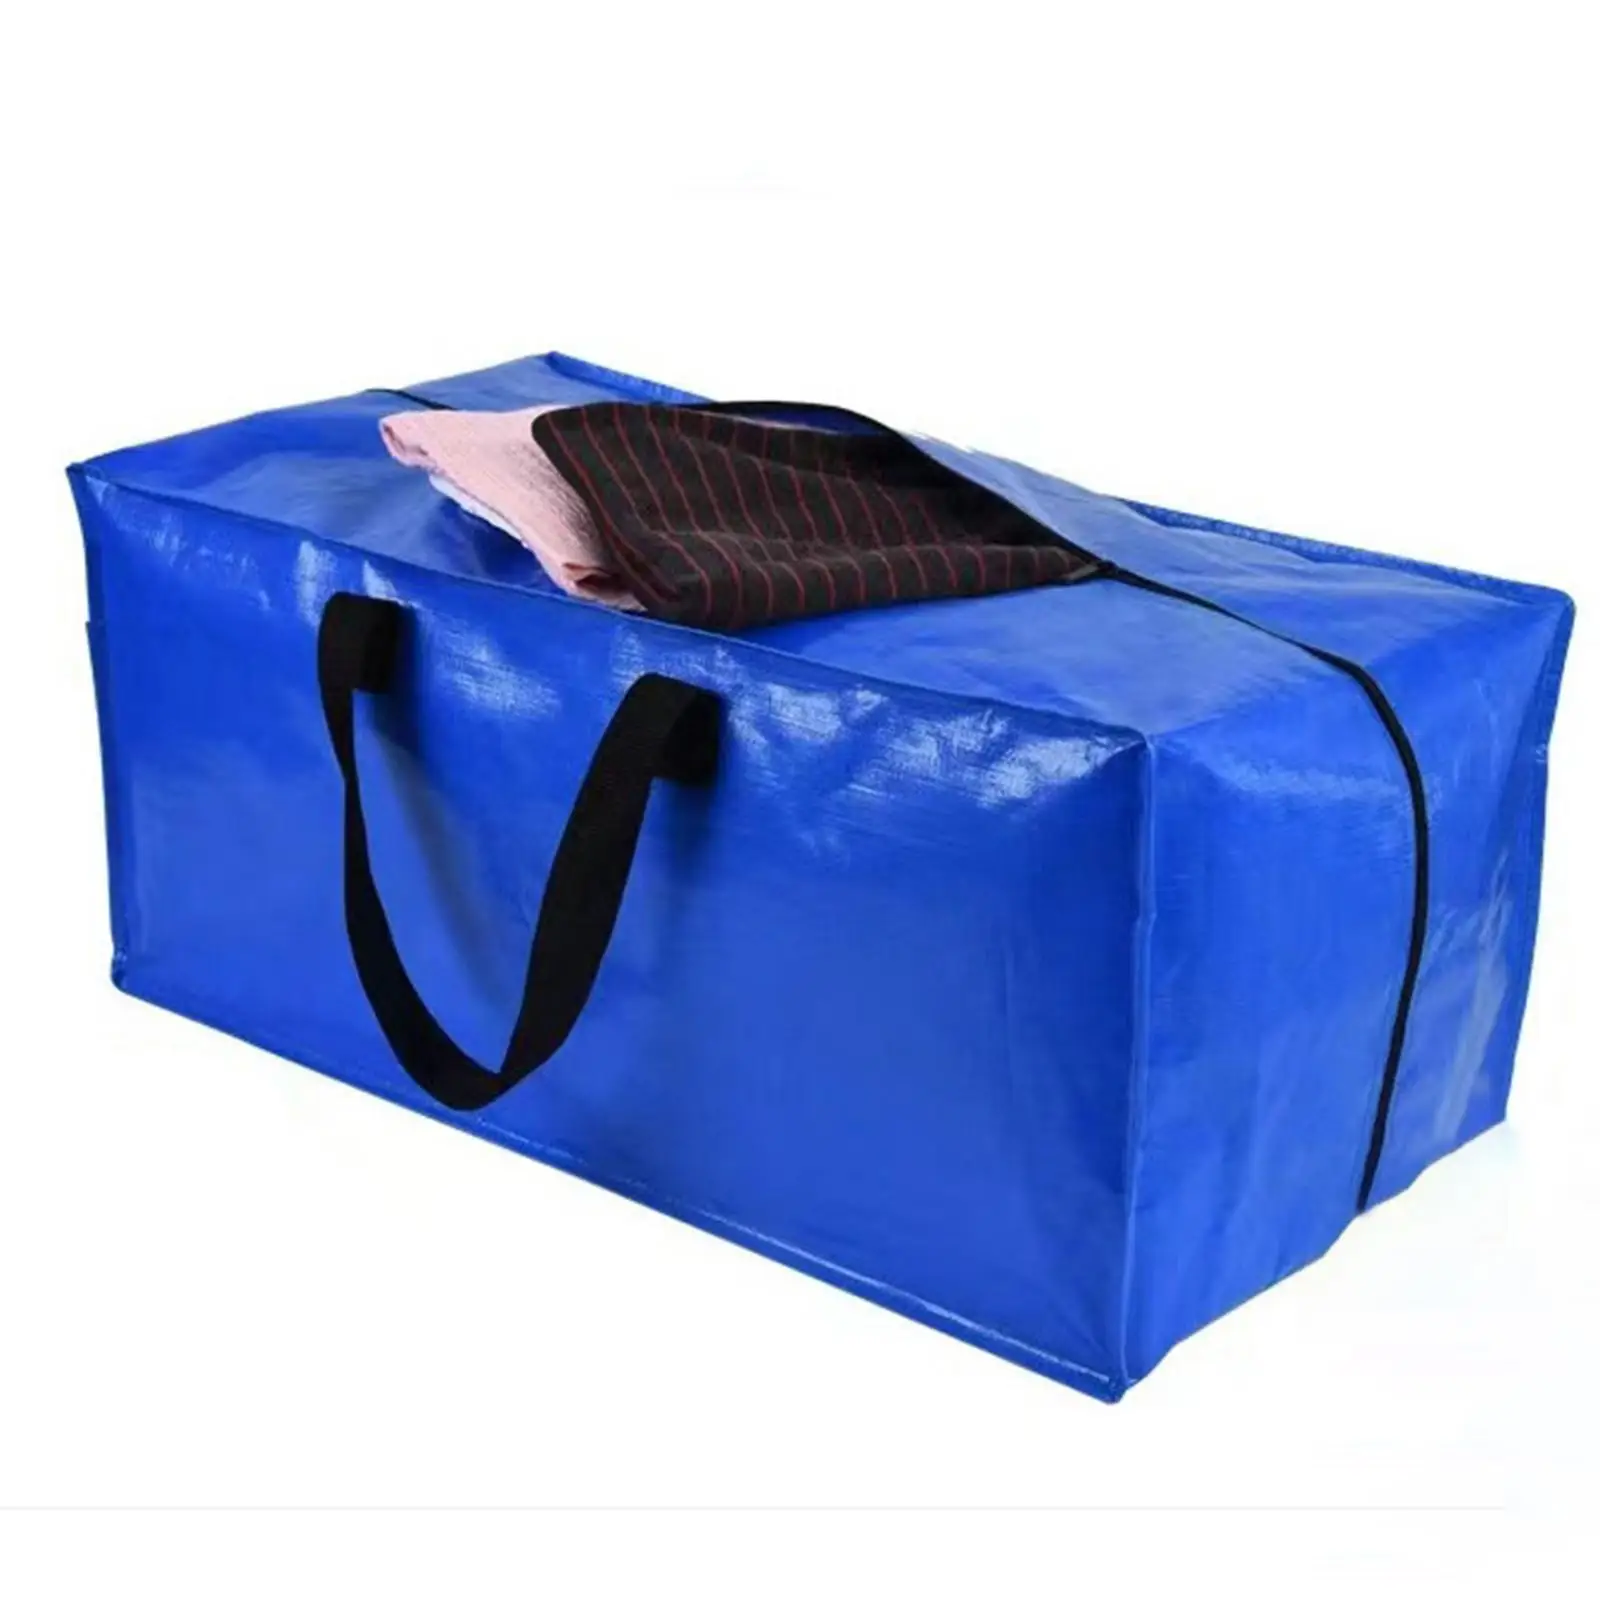 Heavy Duty Large Moving Bags Reusable Double Handles Lightweight Storage Totes for Laundry Travel Garage Bedding Blanket Clothes